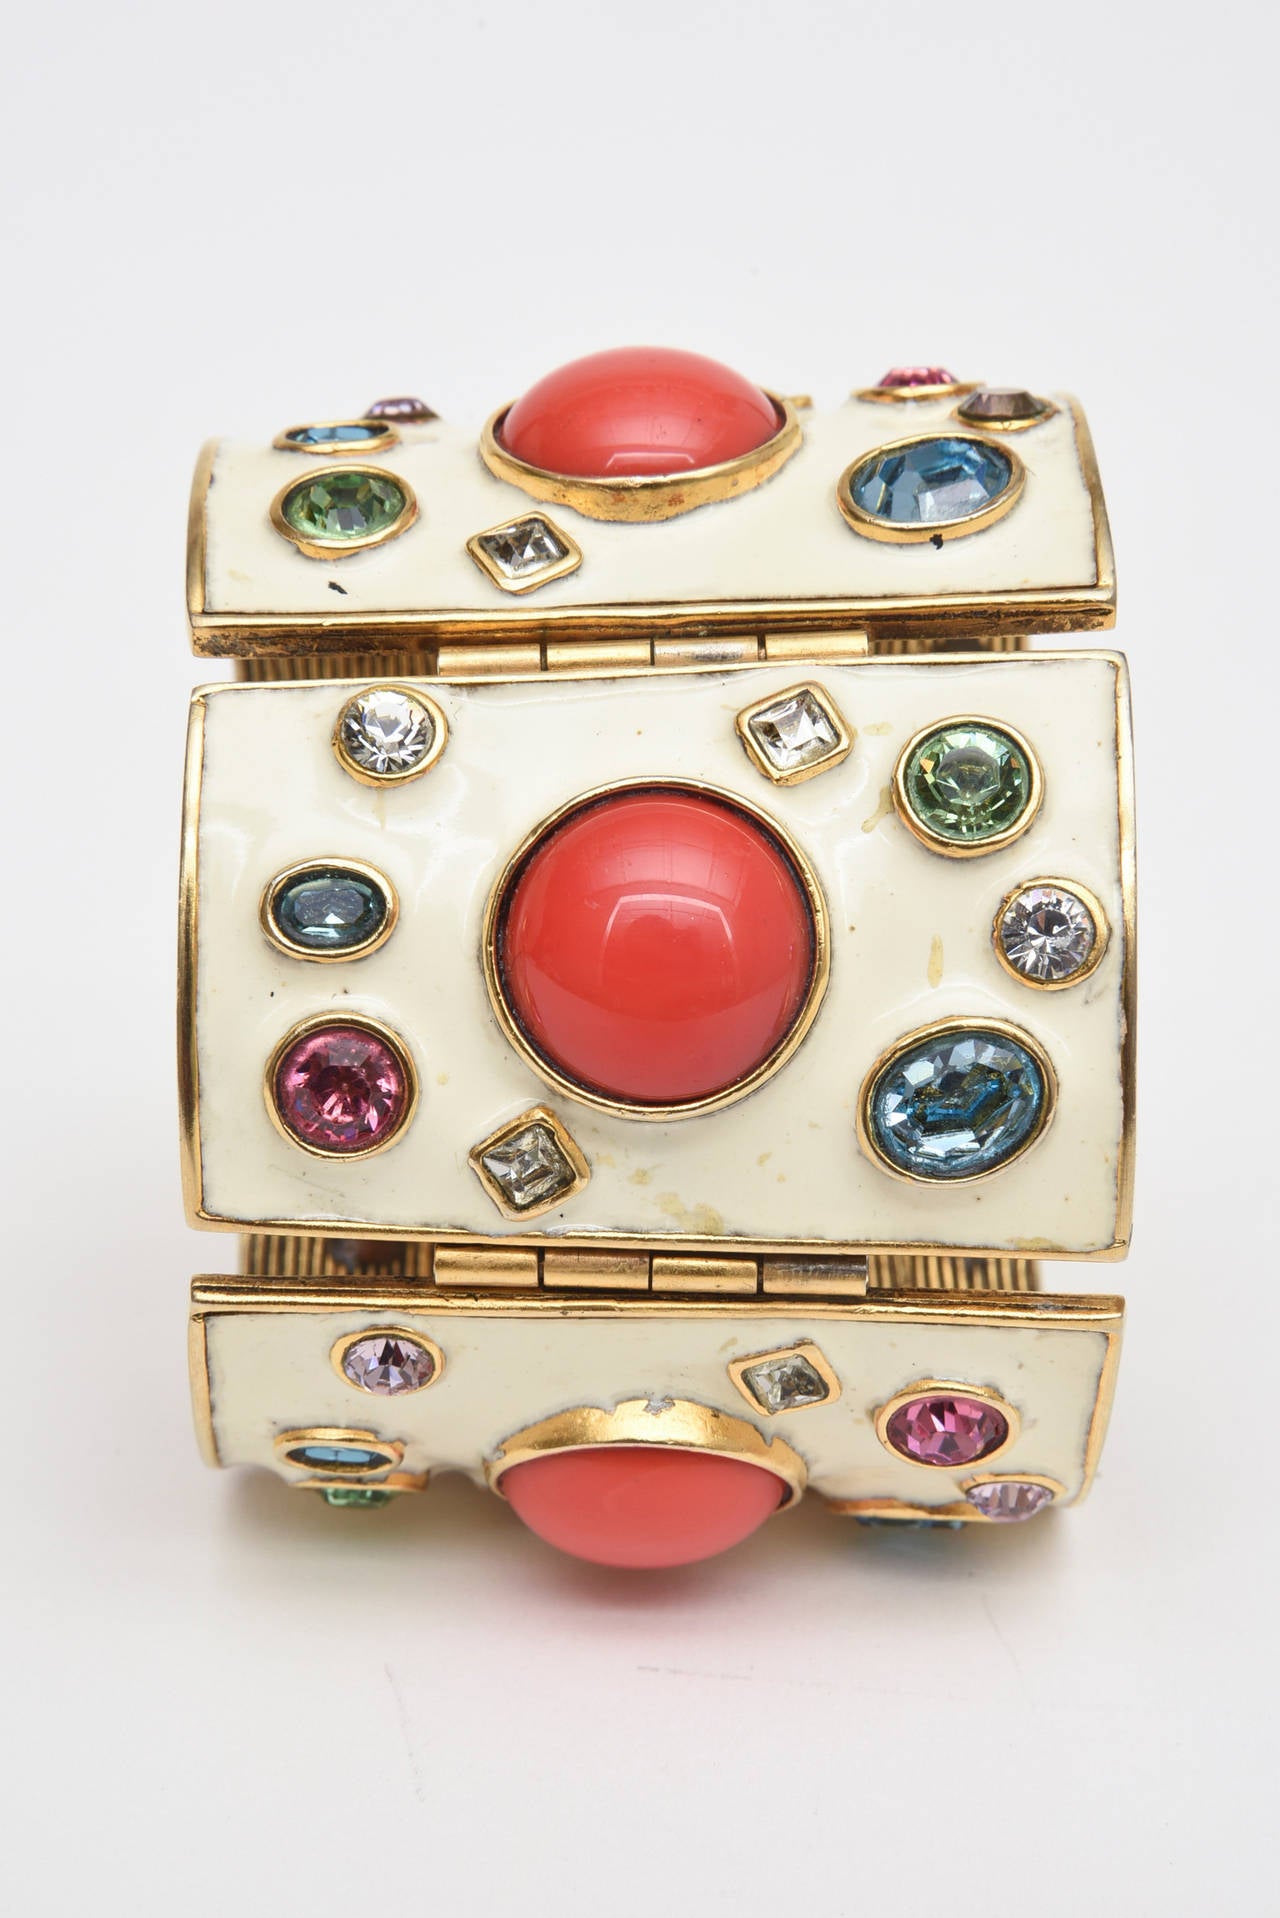 This early KJL attractive enameled & rhinestone cuff makes a colorful statement on one's wrist. 